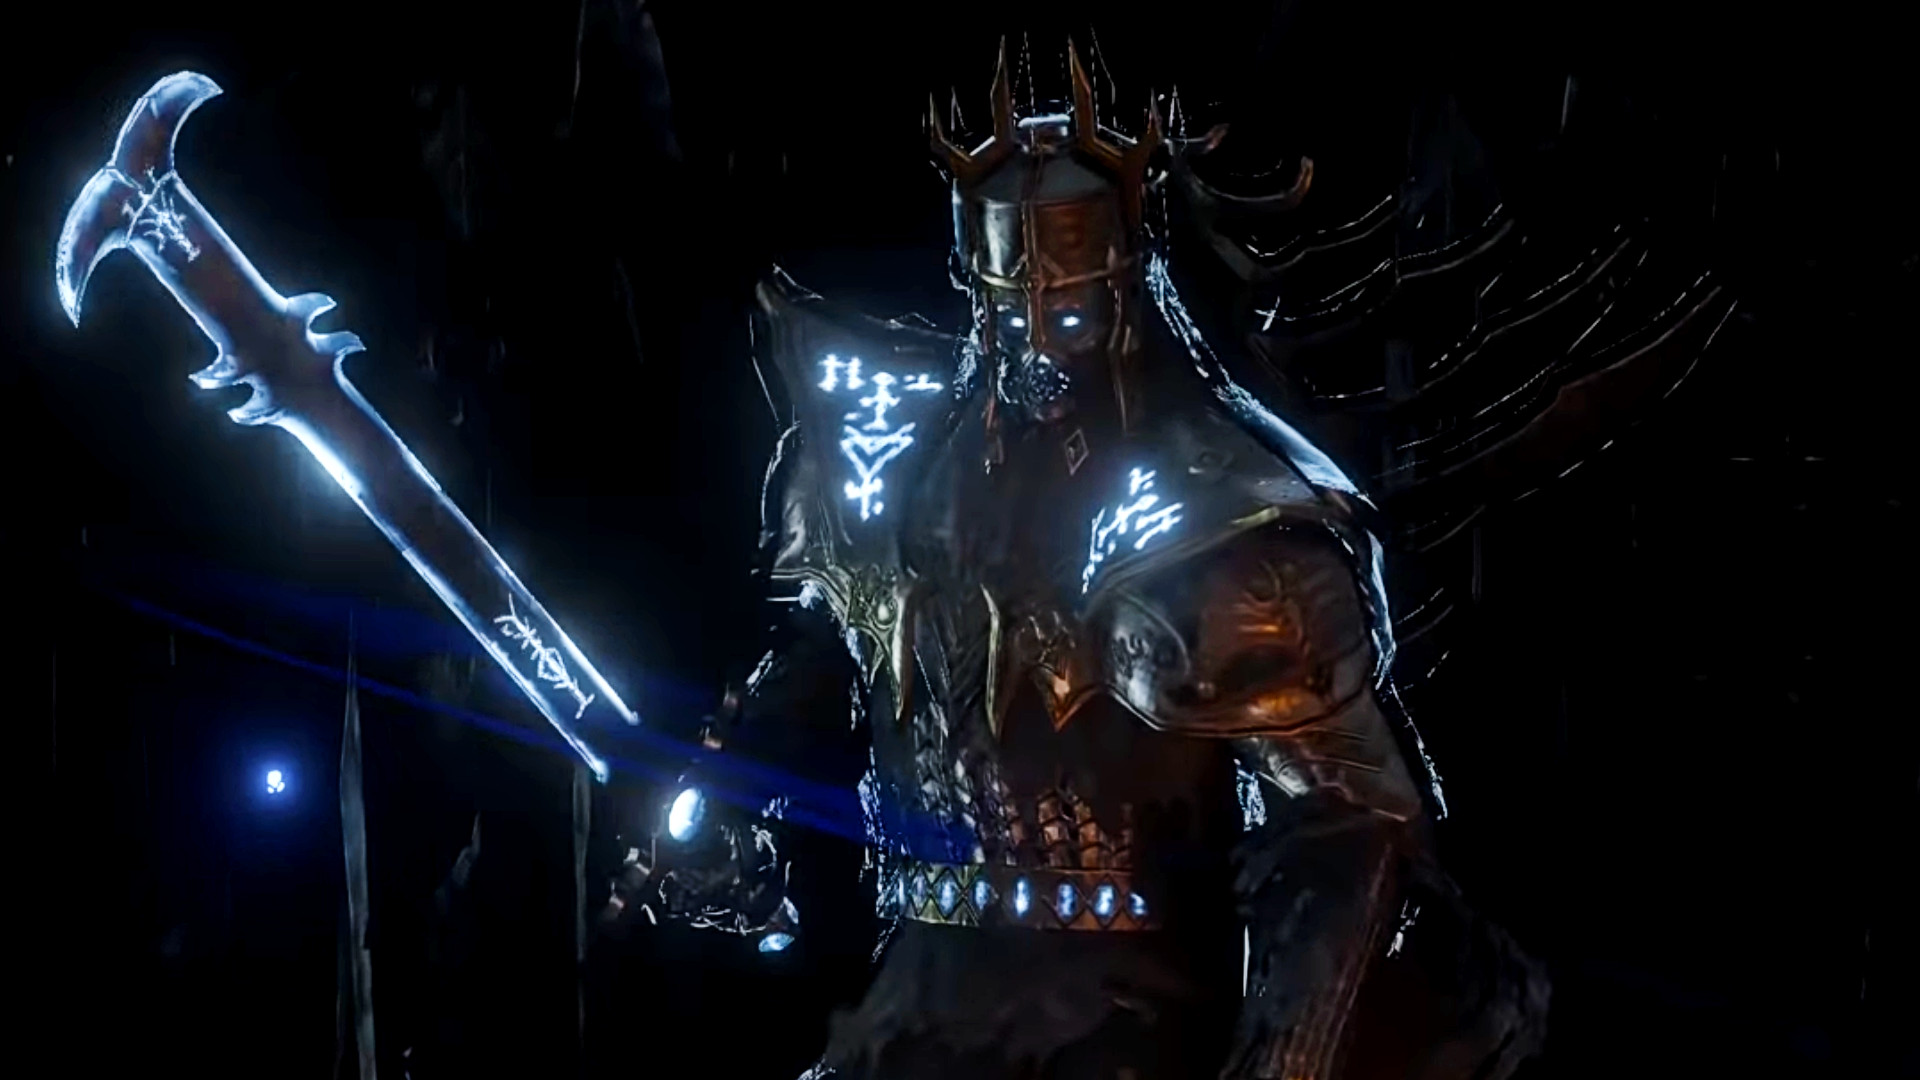 Path of Exile leveling needs a Diablo 3 style Adventure mode, say fans